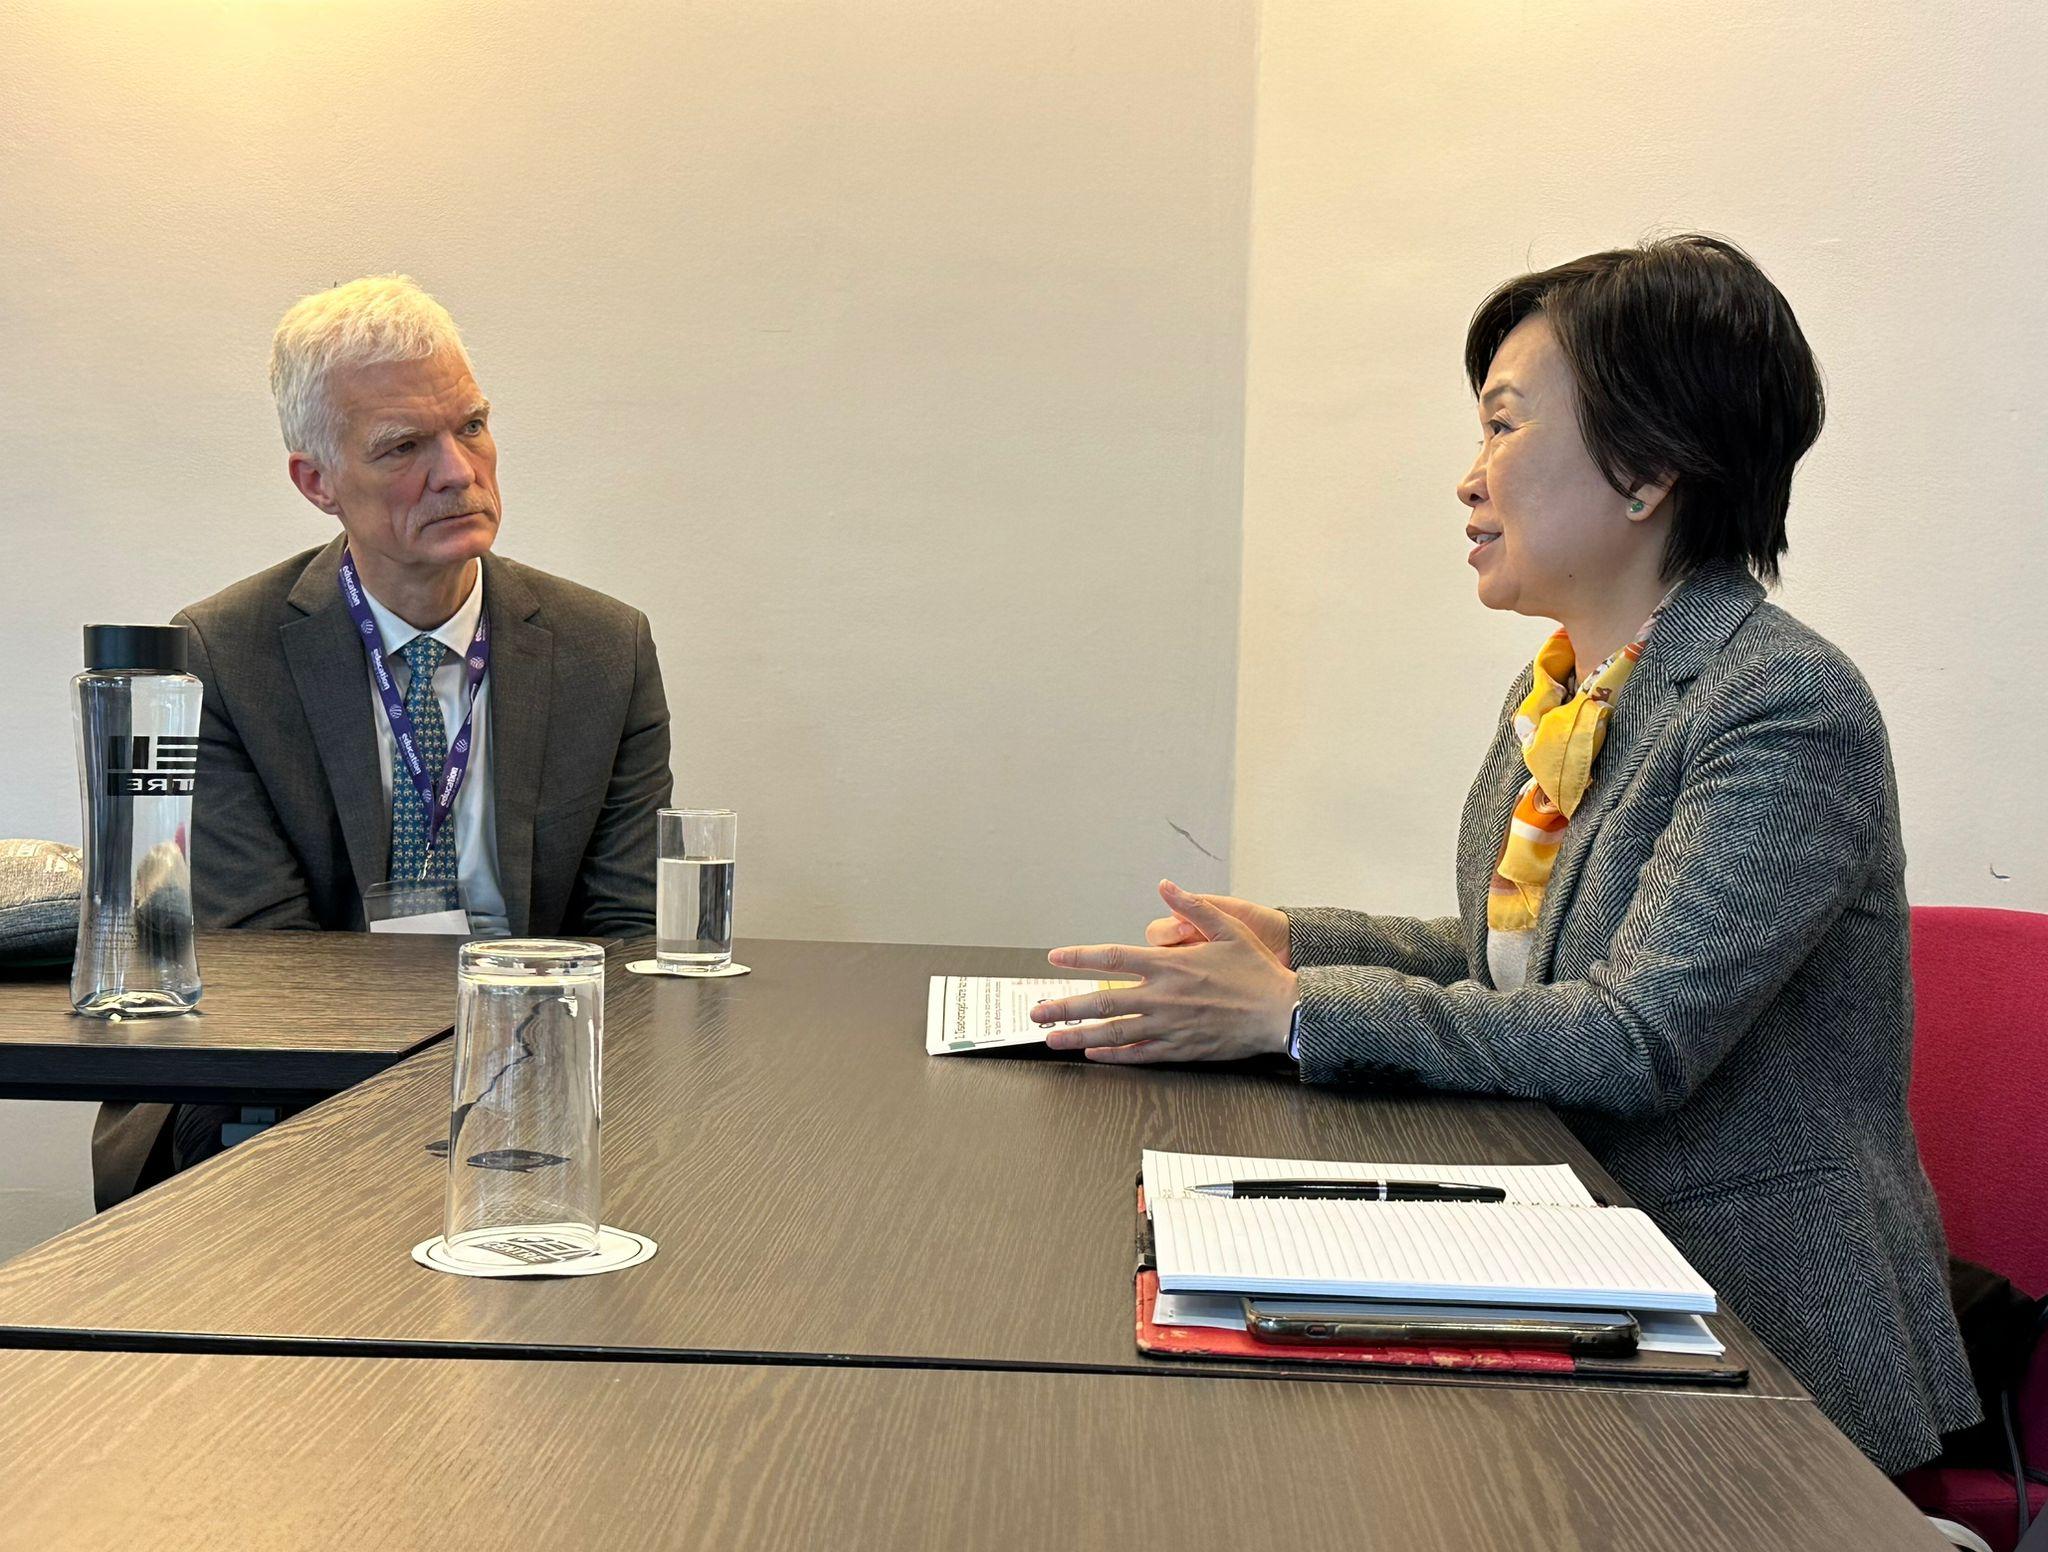 The Secretary for Education, Dr Choi Yuk-lin (right), meets the Director for Education and Skills of the Organisation for Economic Co-operation and Development, Mr Andreas Schleicher (left), during the Education World Forum in London, the United Kingdom, on May 9 (London time).
